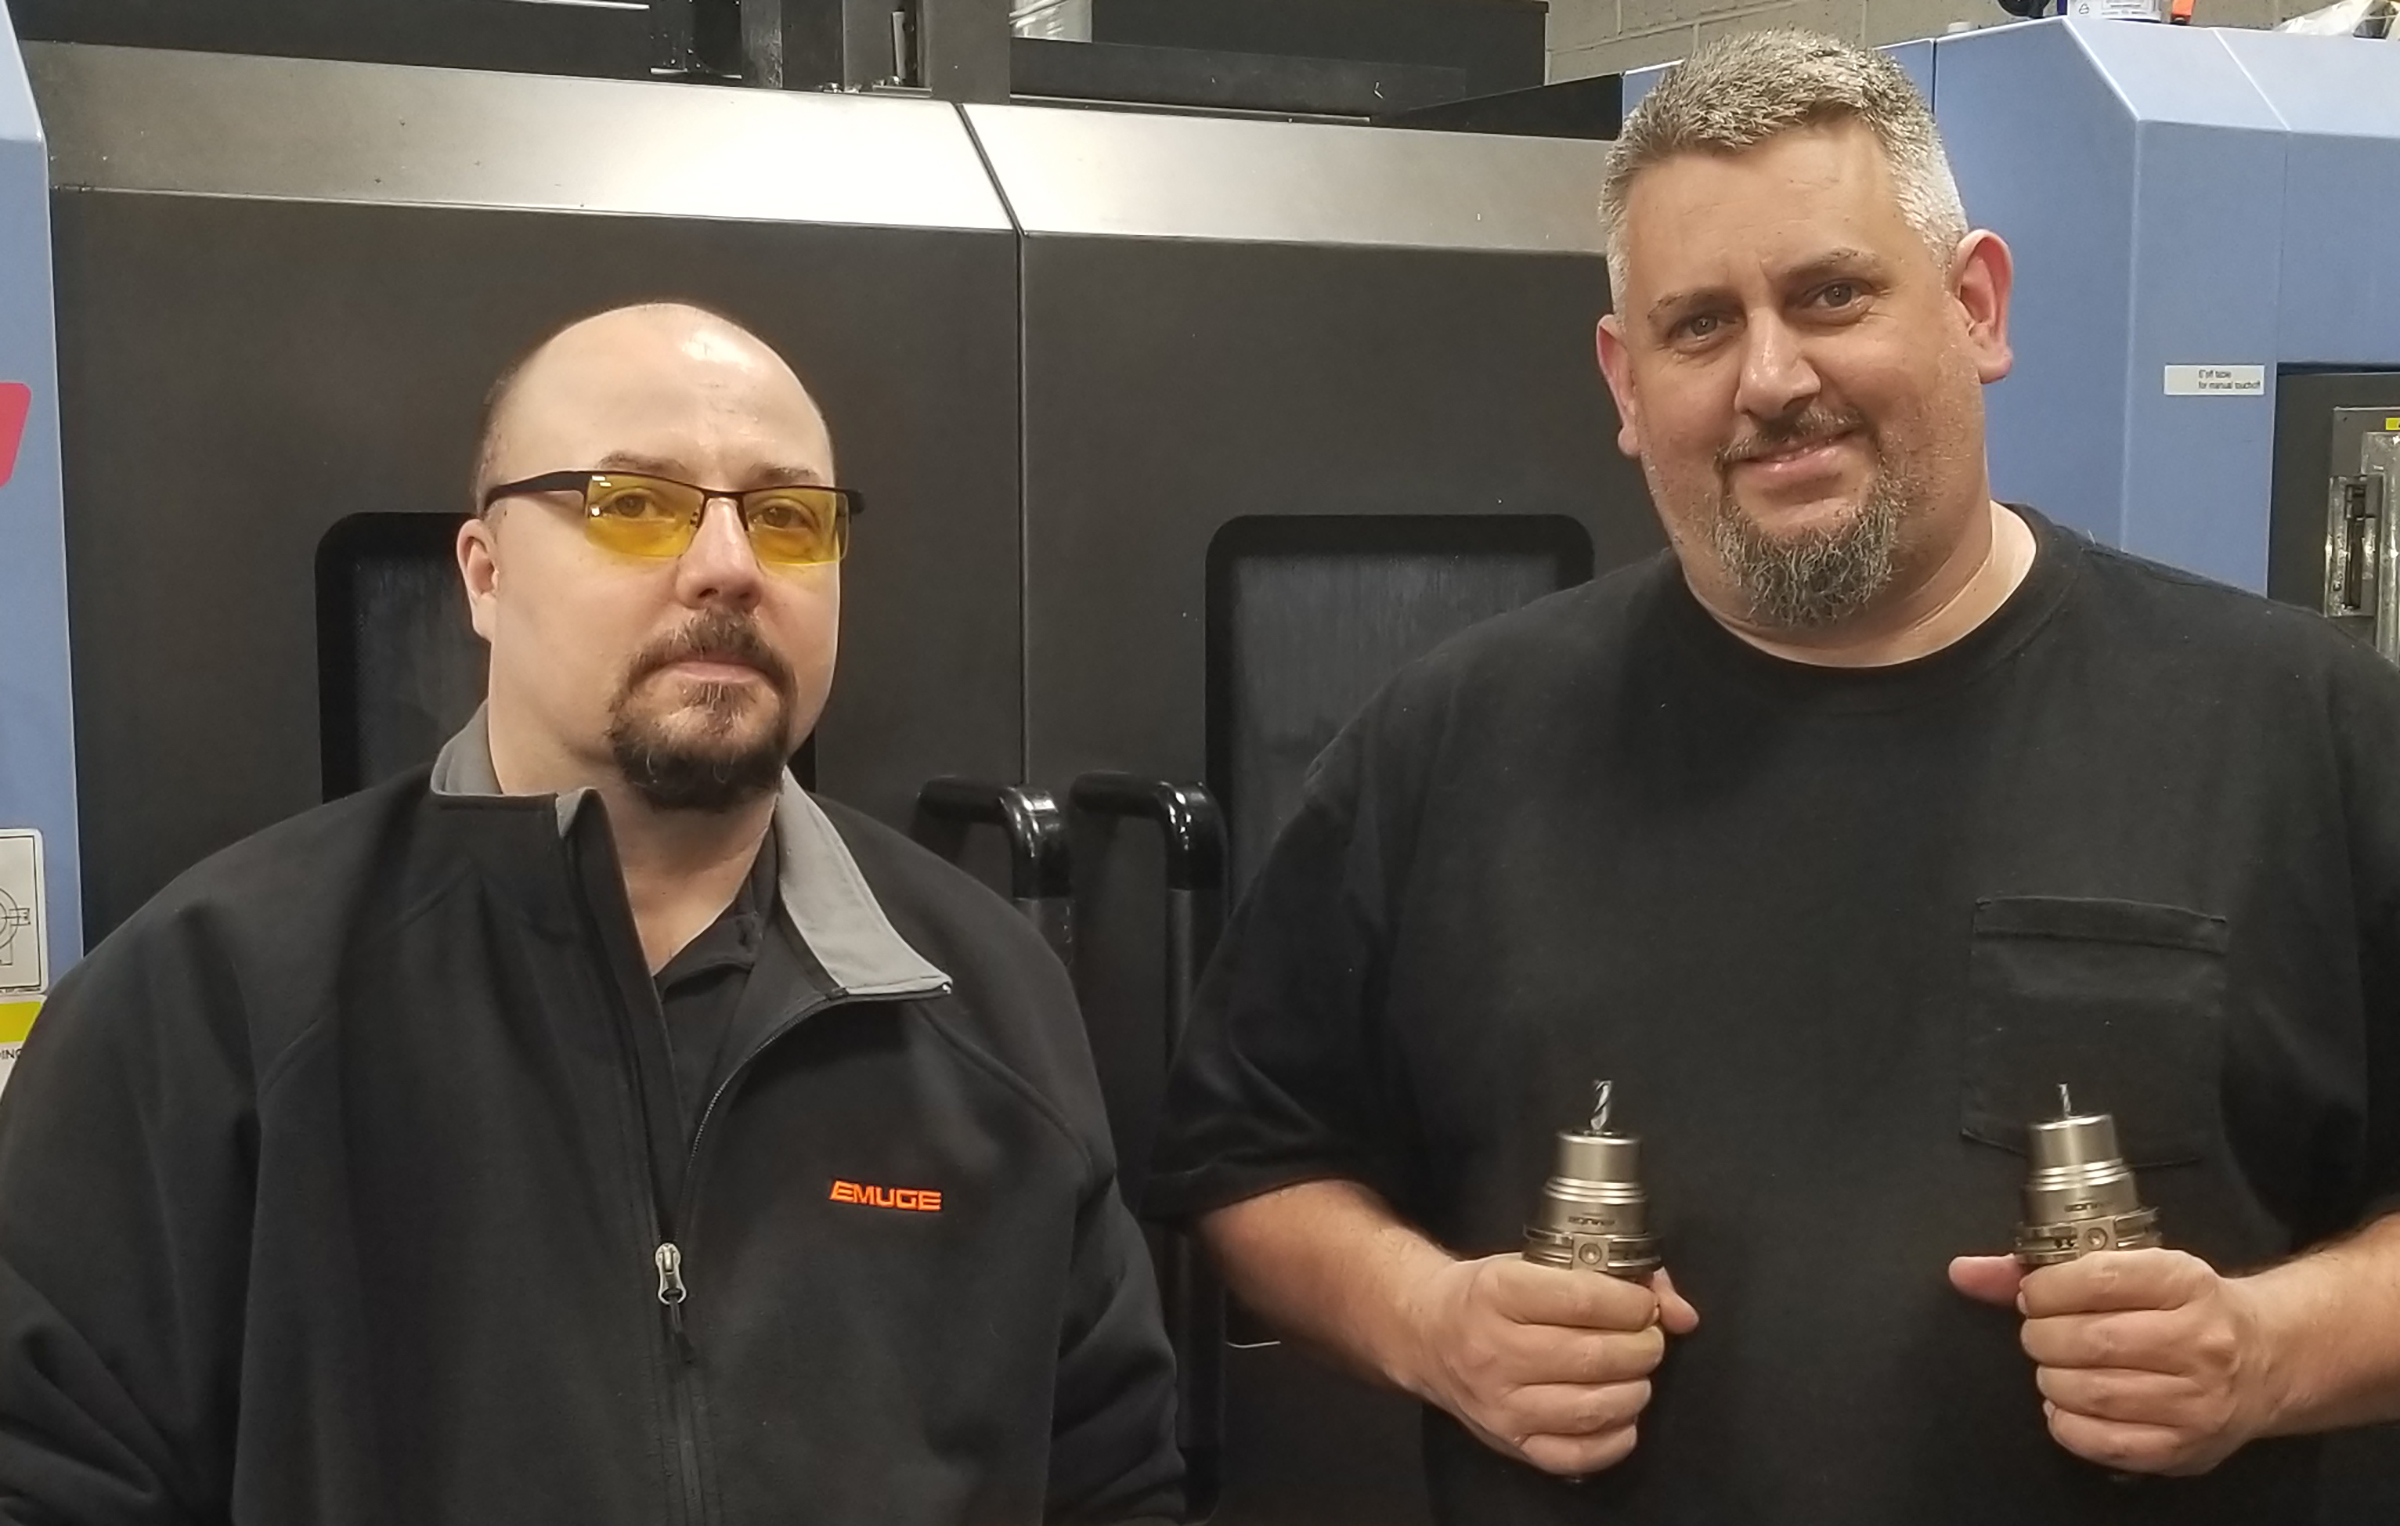 Sales Representative Bill Anderson from EMUGE’s local distributor W.C. Chapman (L), and SB Dezigns Owner and CEO Billy Crabtree (R) at the SB Dezigns precision production machine shop.